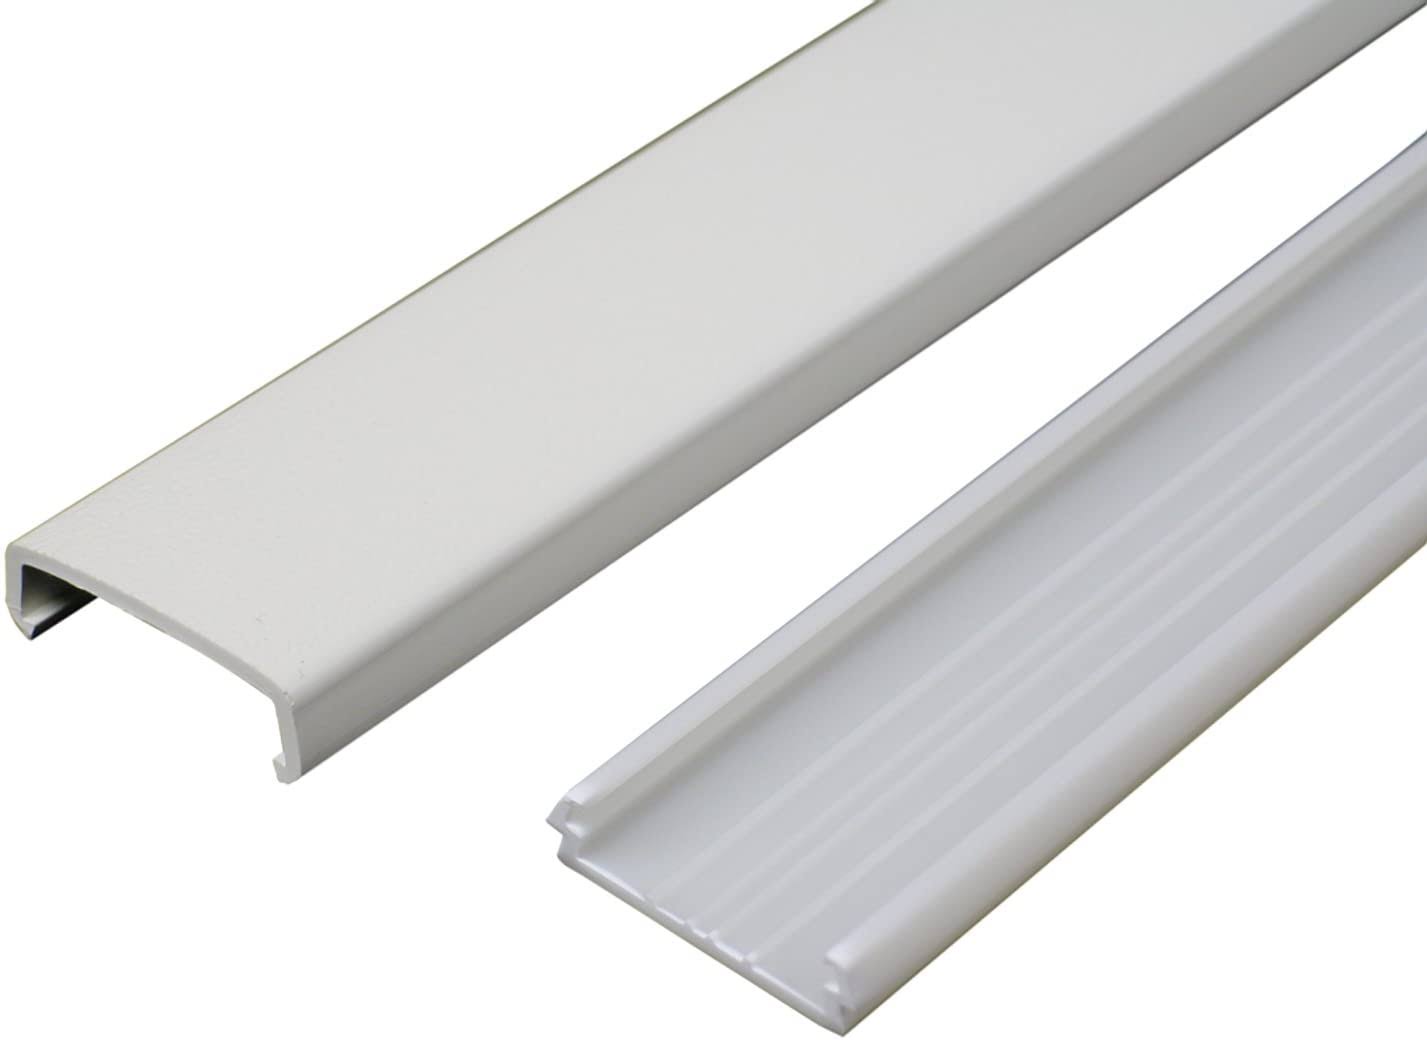 LEGRAND ON-WALL PVC FLAT ELBOWS IVORY NM6 WIREMOLD 